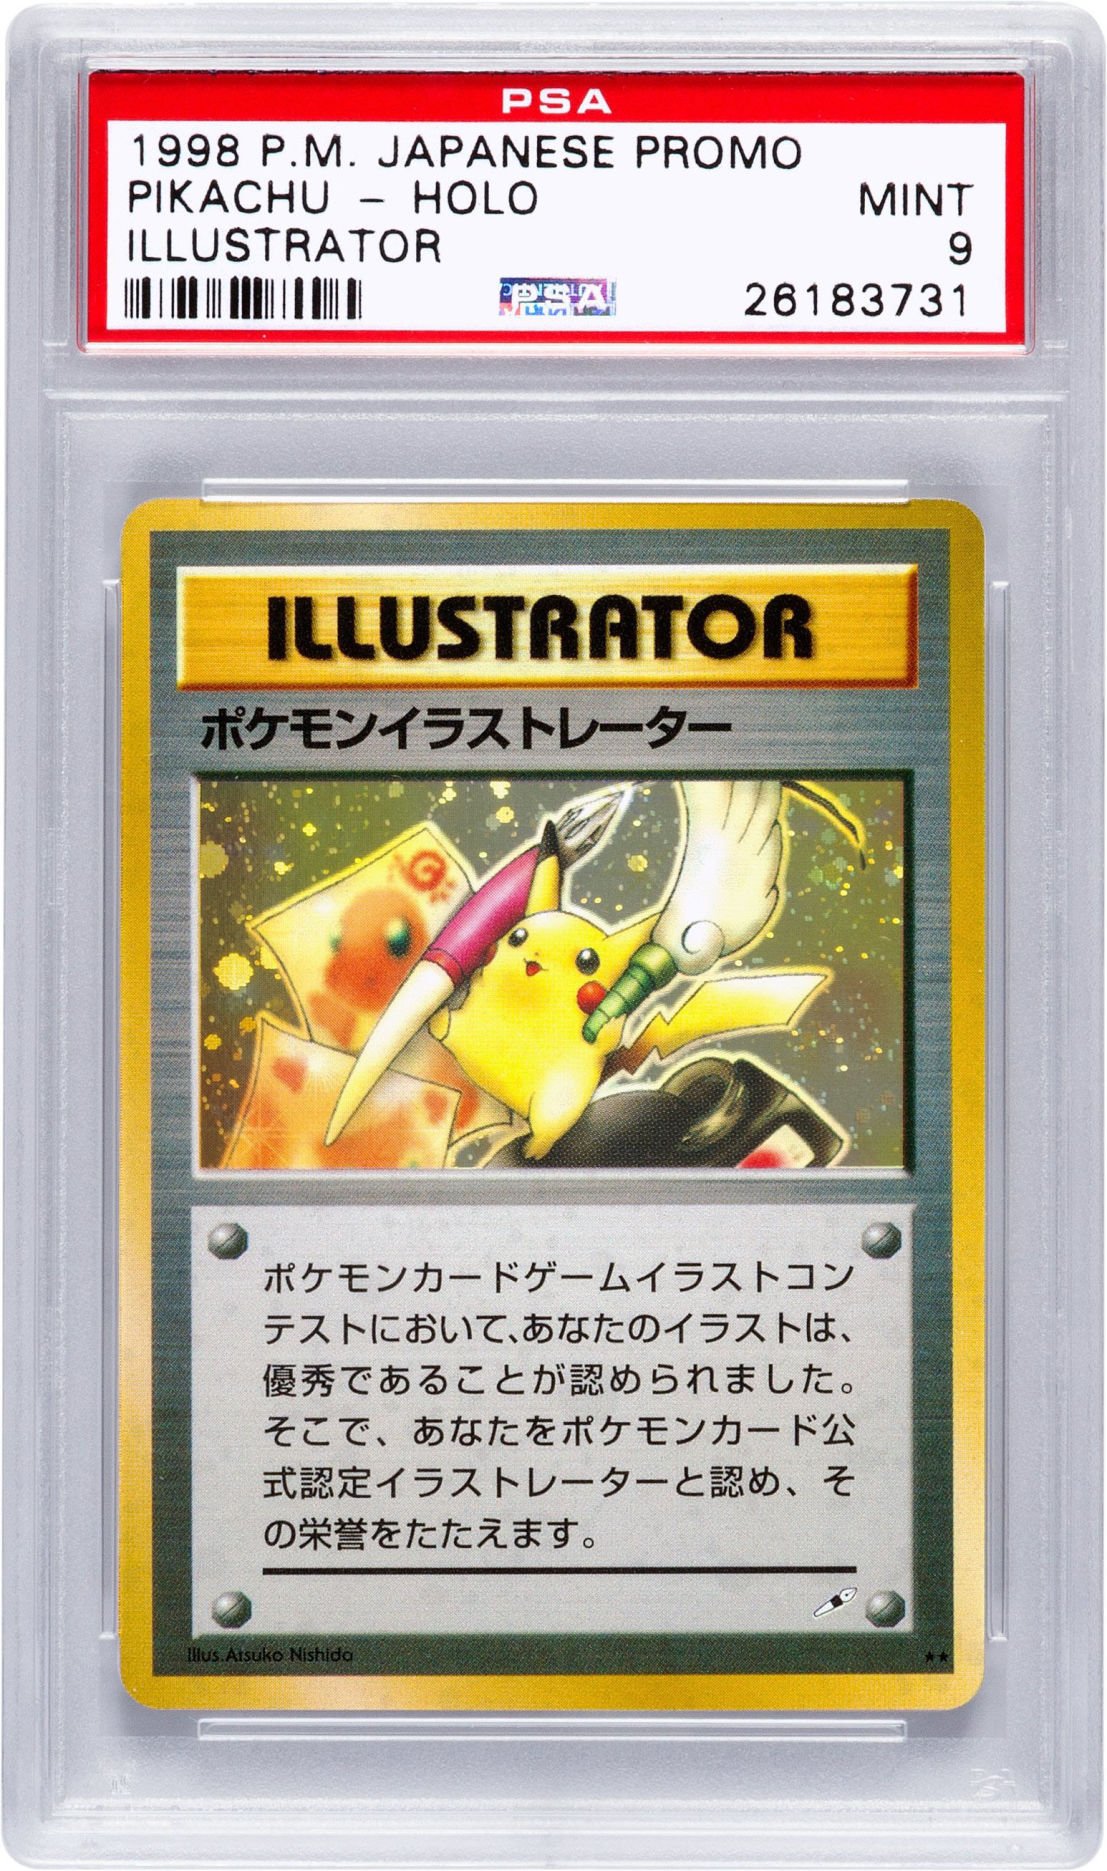 heritage-auctions-sells-world-s-most-valuable-pokemon-card-things-to-do-in-tucson-tucson